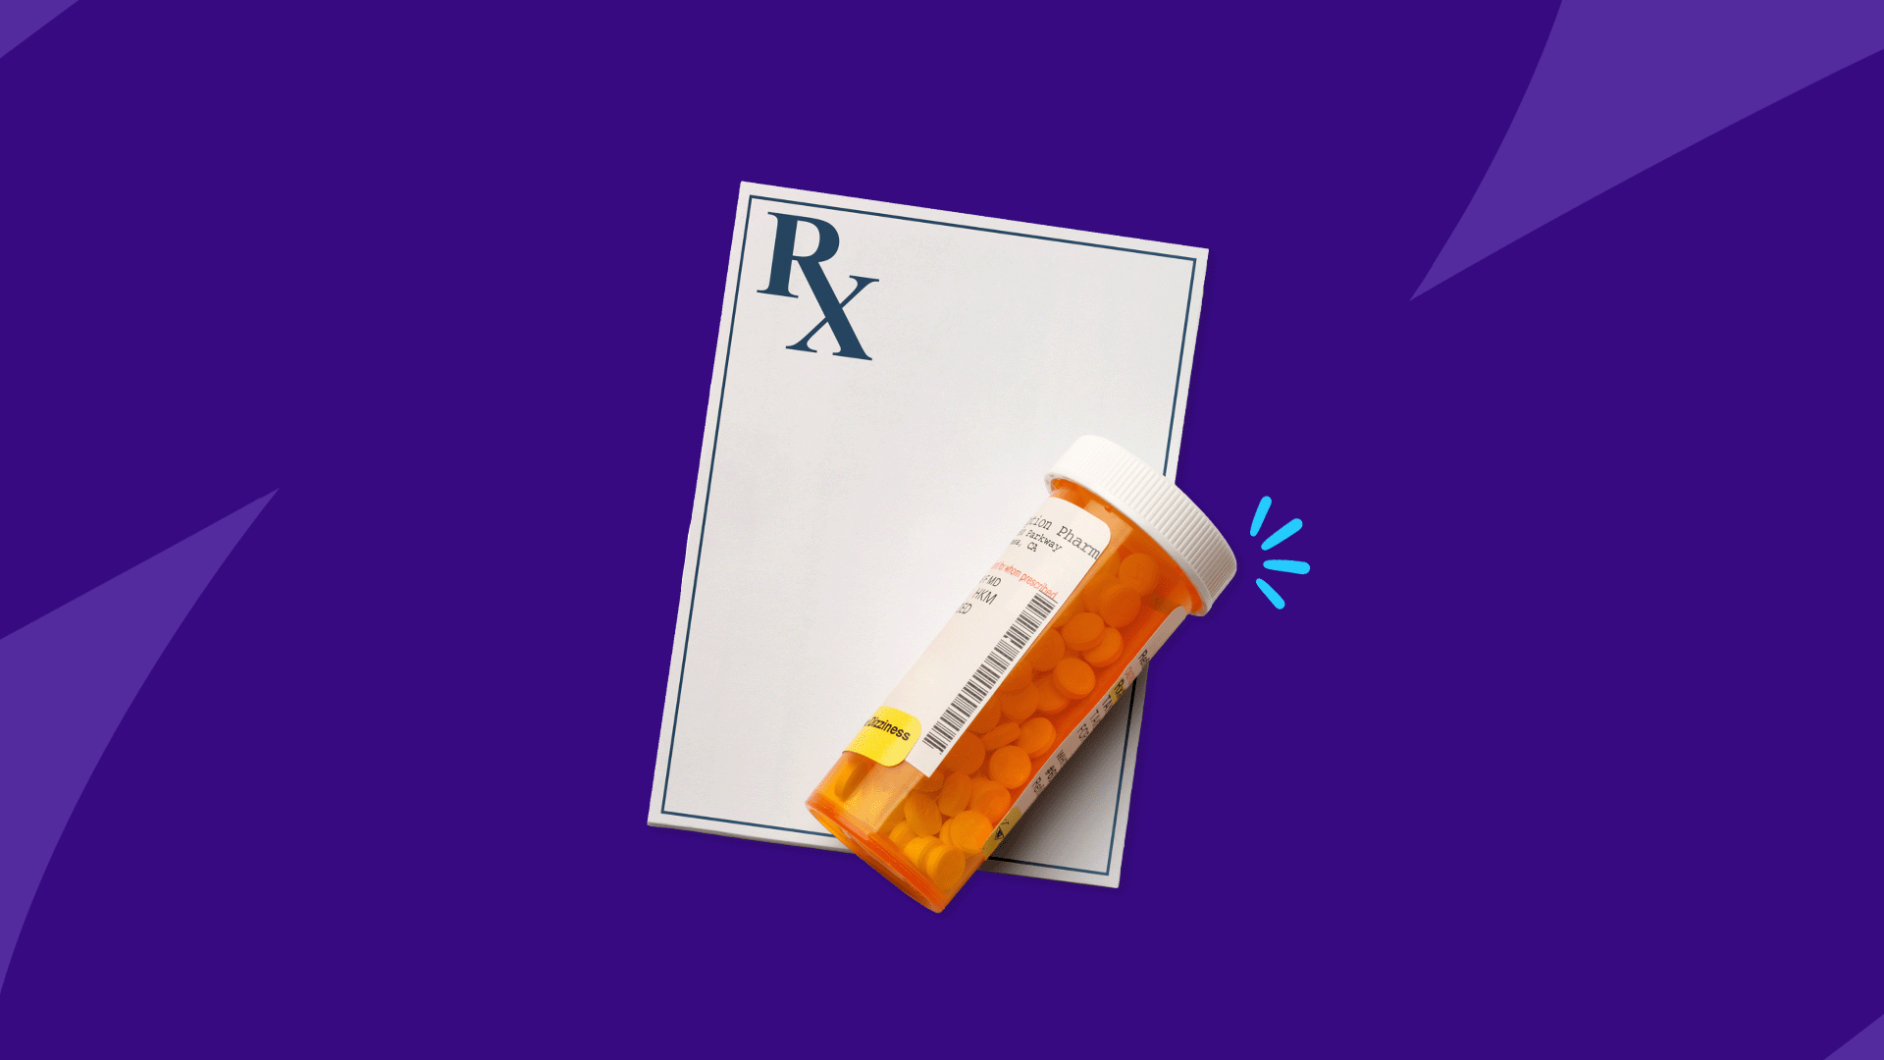 Rx prescription pad and Rx pill bottle: Metronidazole interactions